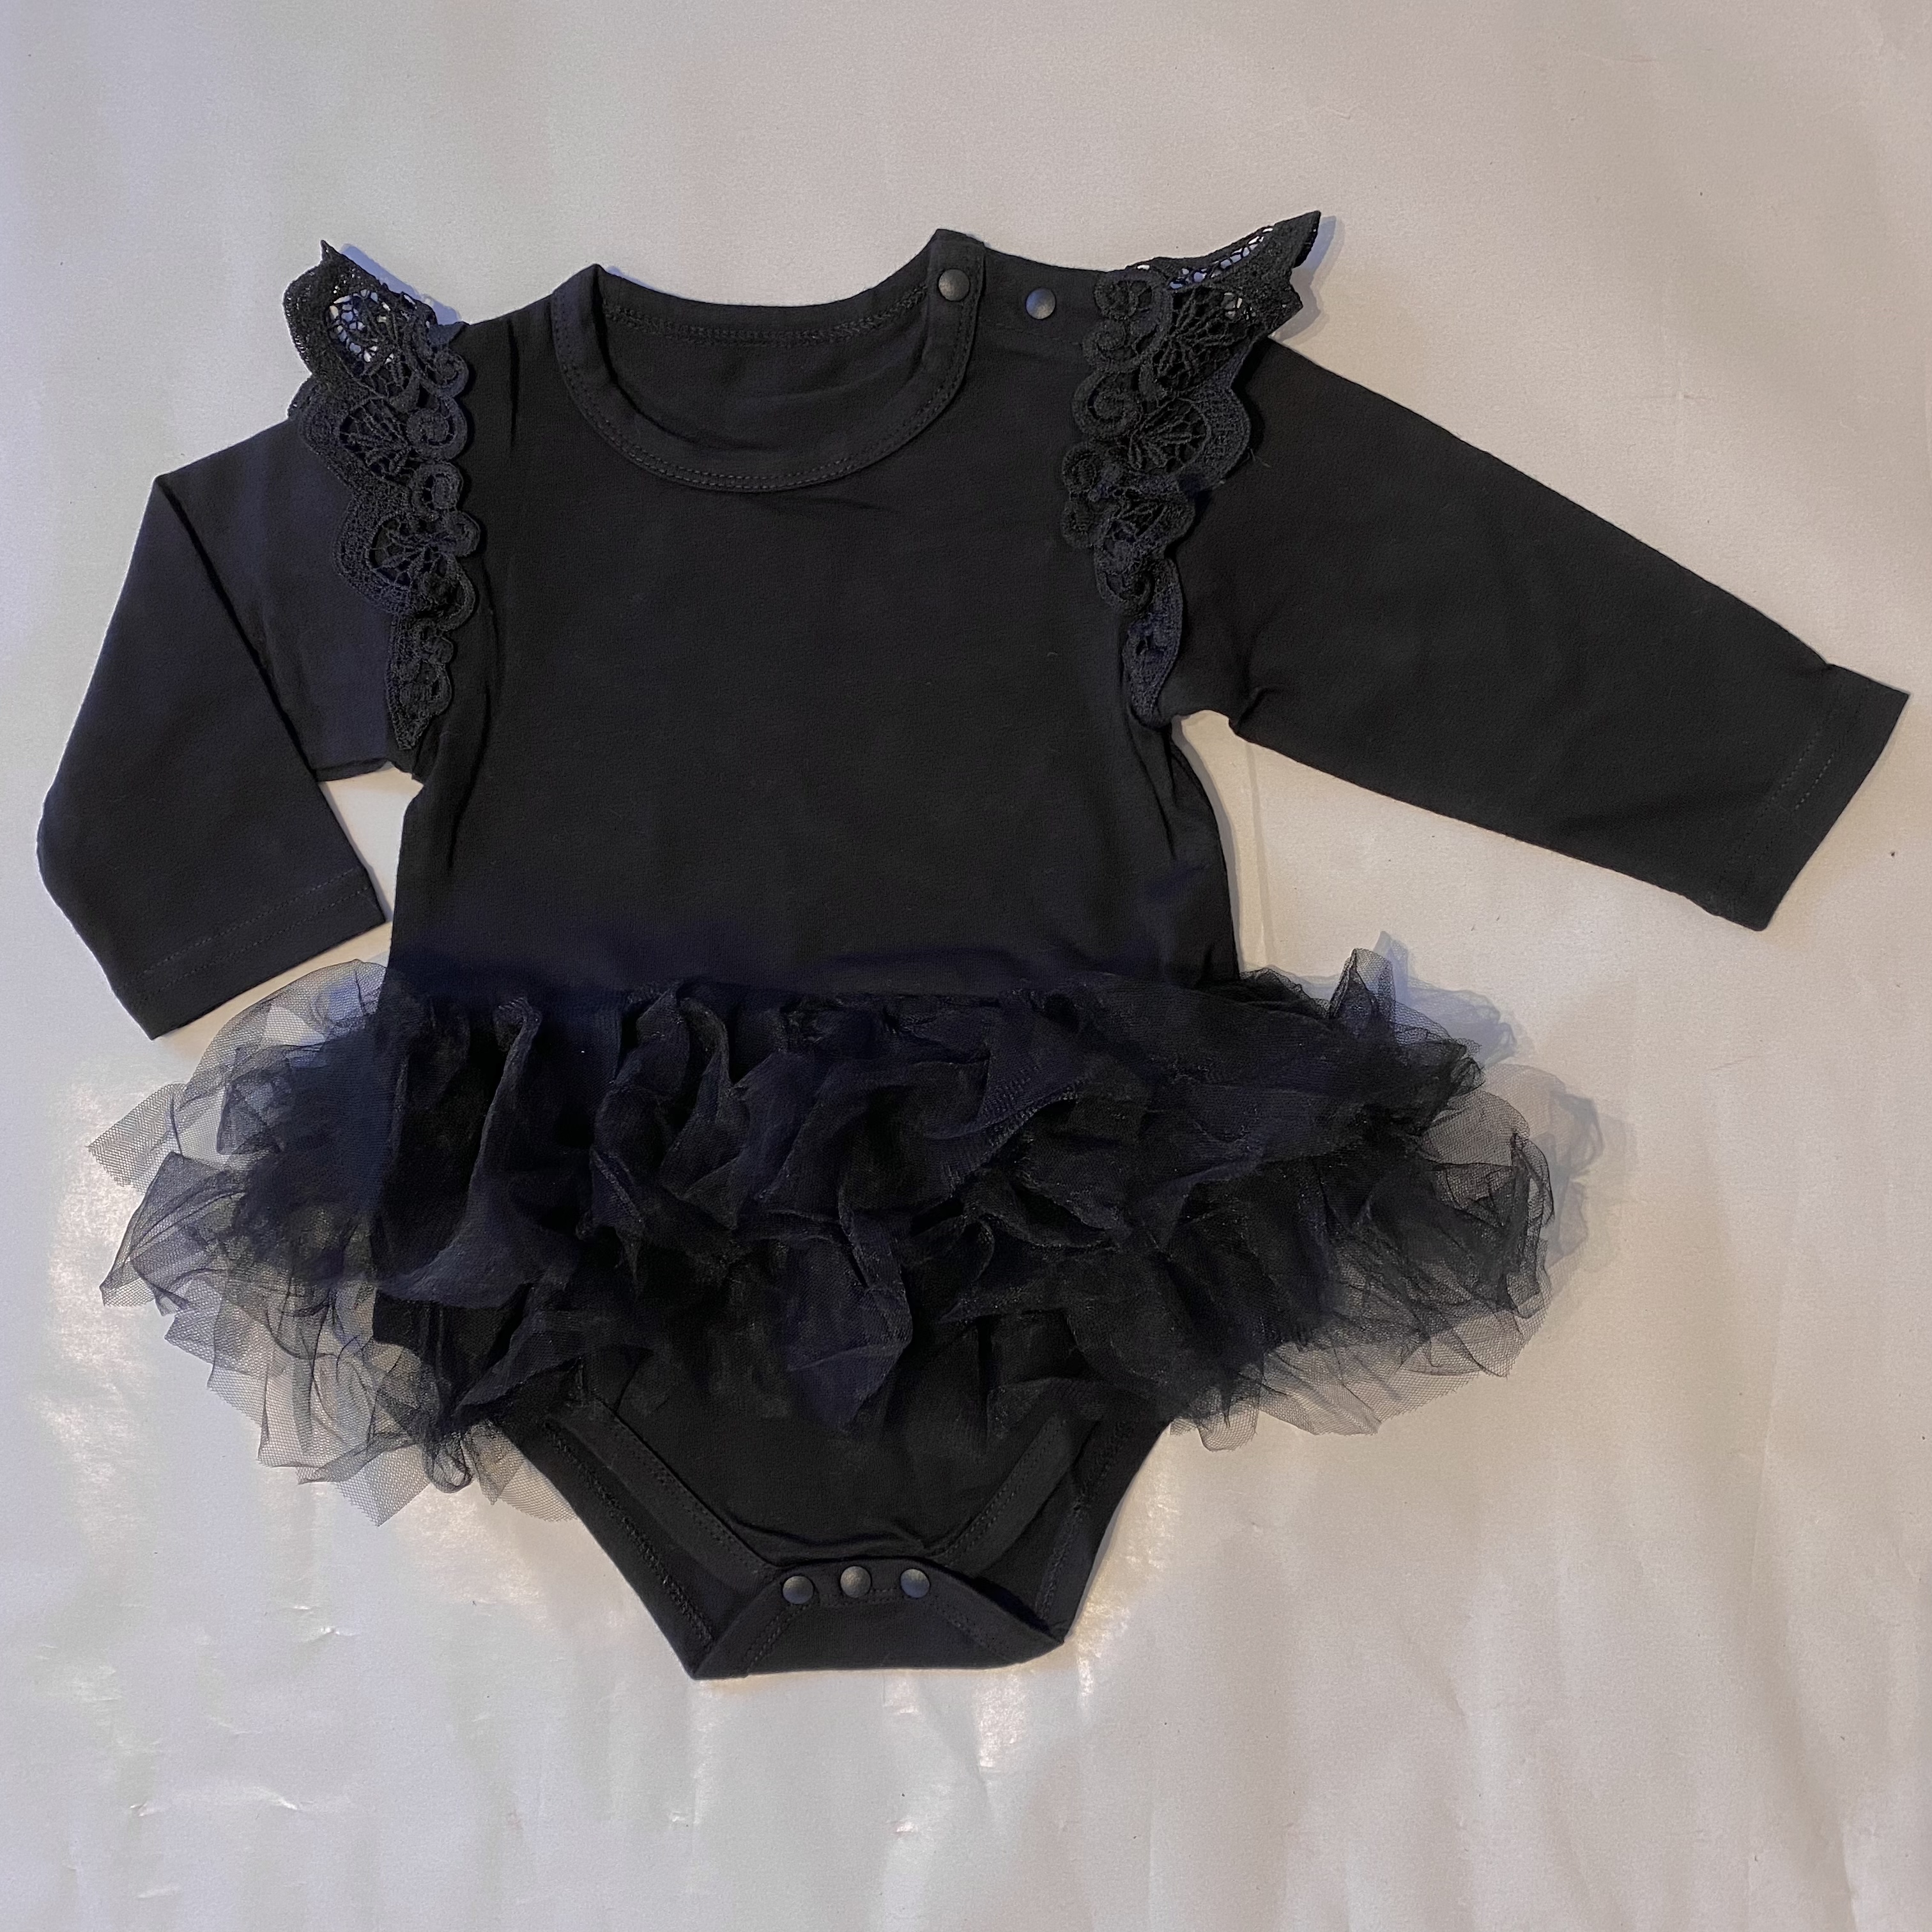 BODY DRESS WITH LACE ANGLE WINGS AND TYL SHIRT - BLACK - LONG SLEEVED